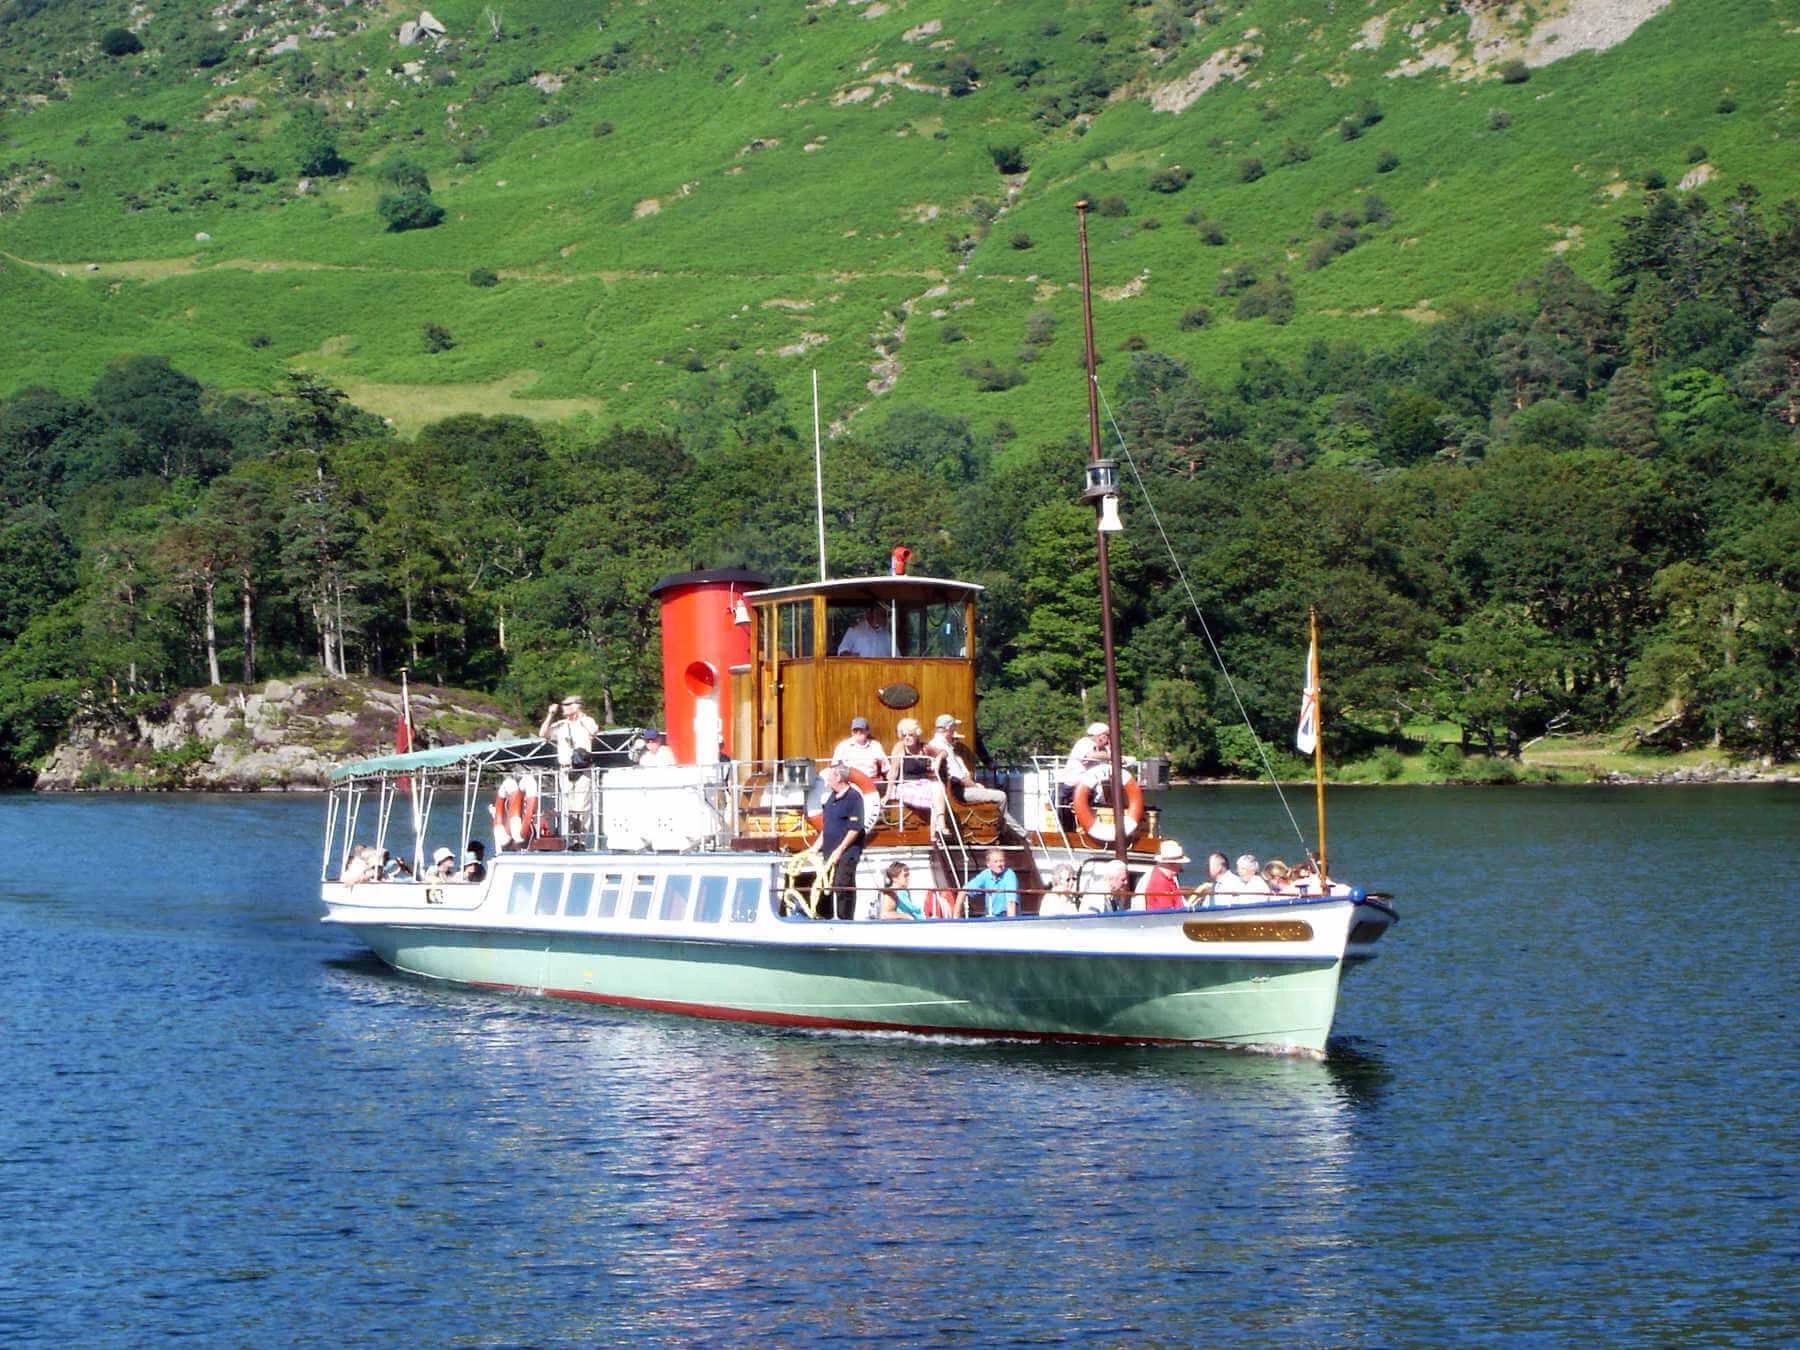 Boats in England's Lake District help sightseers enjoy the natural beauty